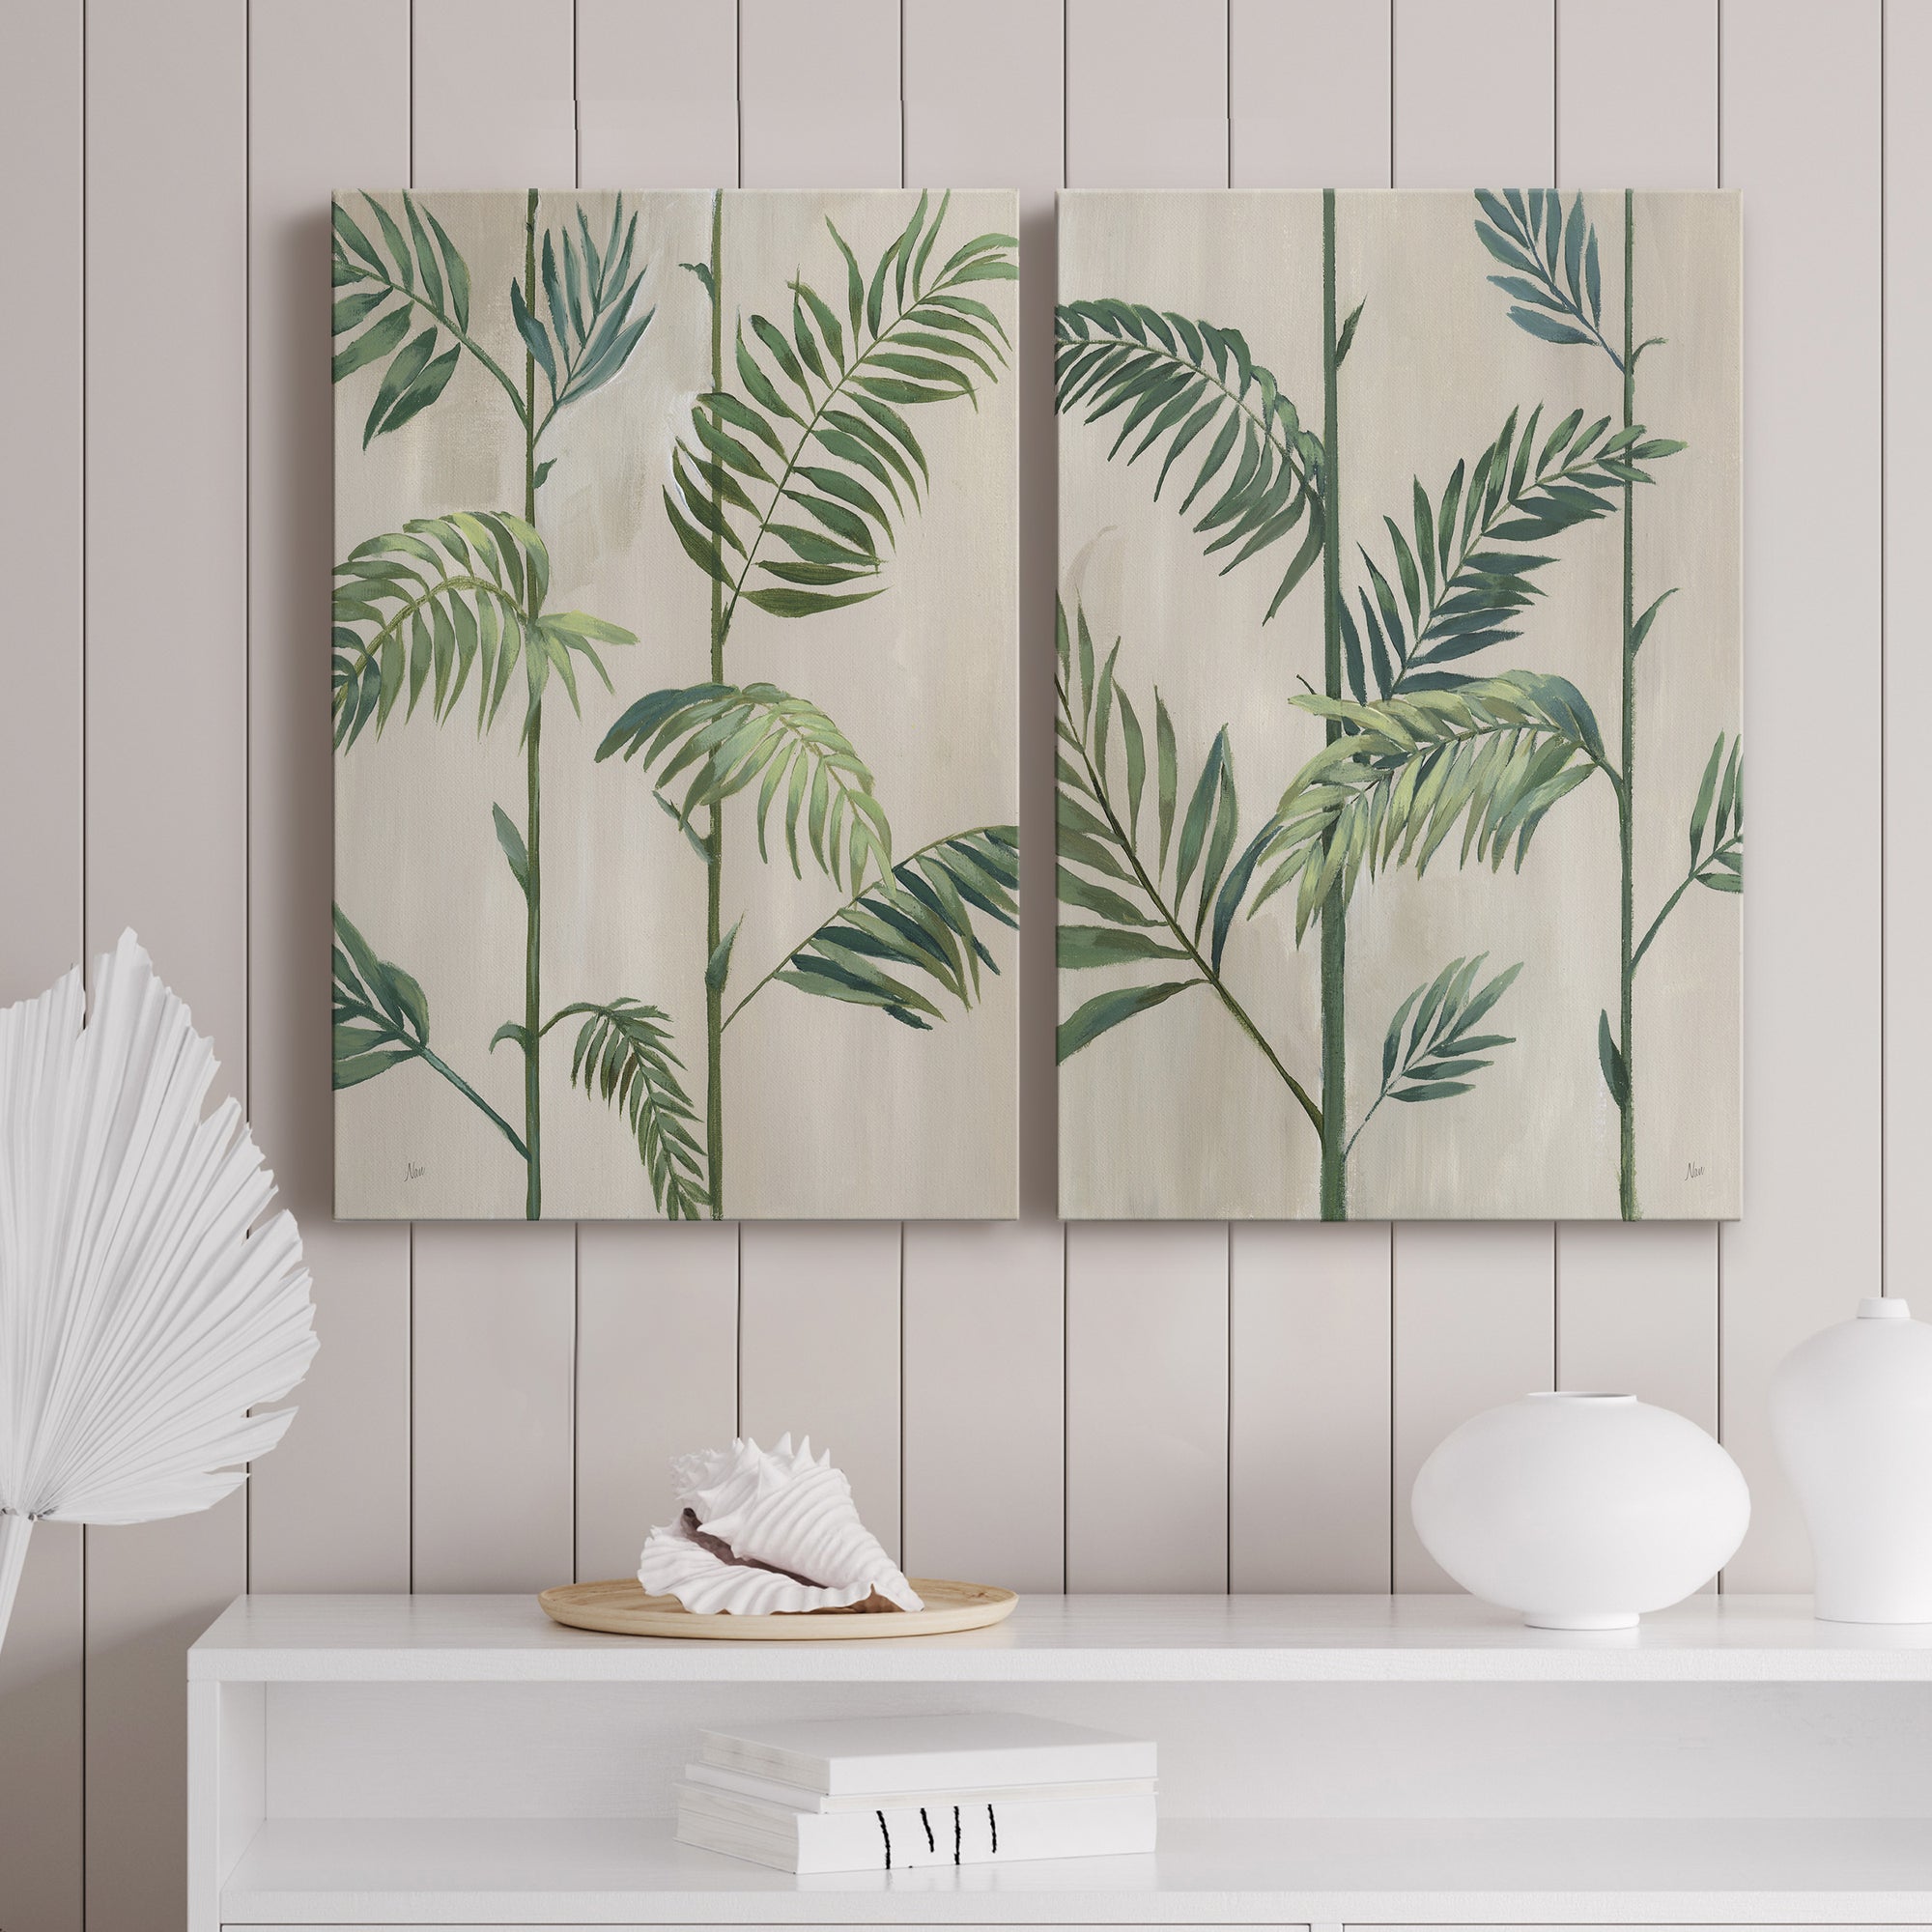 Modern Fronds I Premium Gallery Wrapped Canvas - Ready to Hang - Set of 2 - 8 x 12 Each